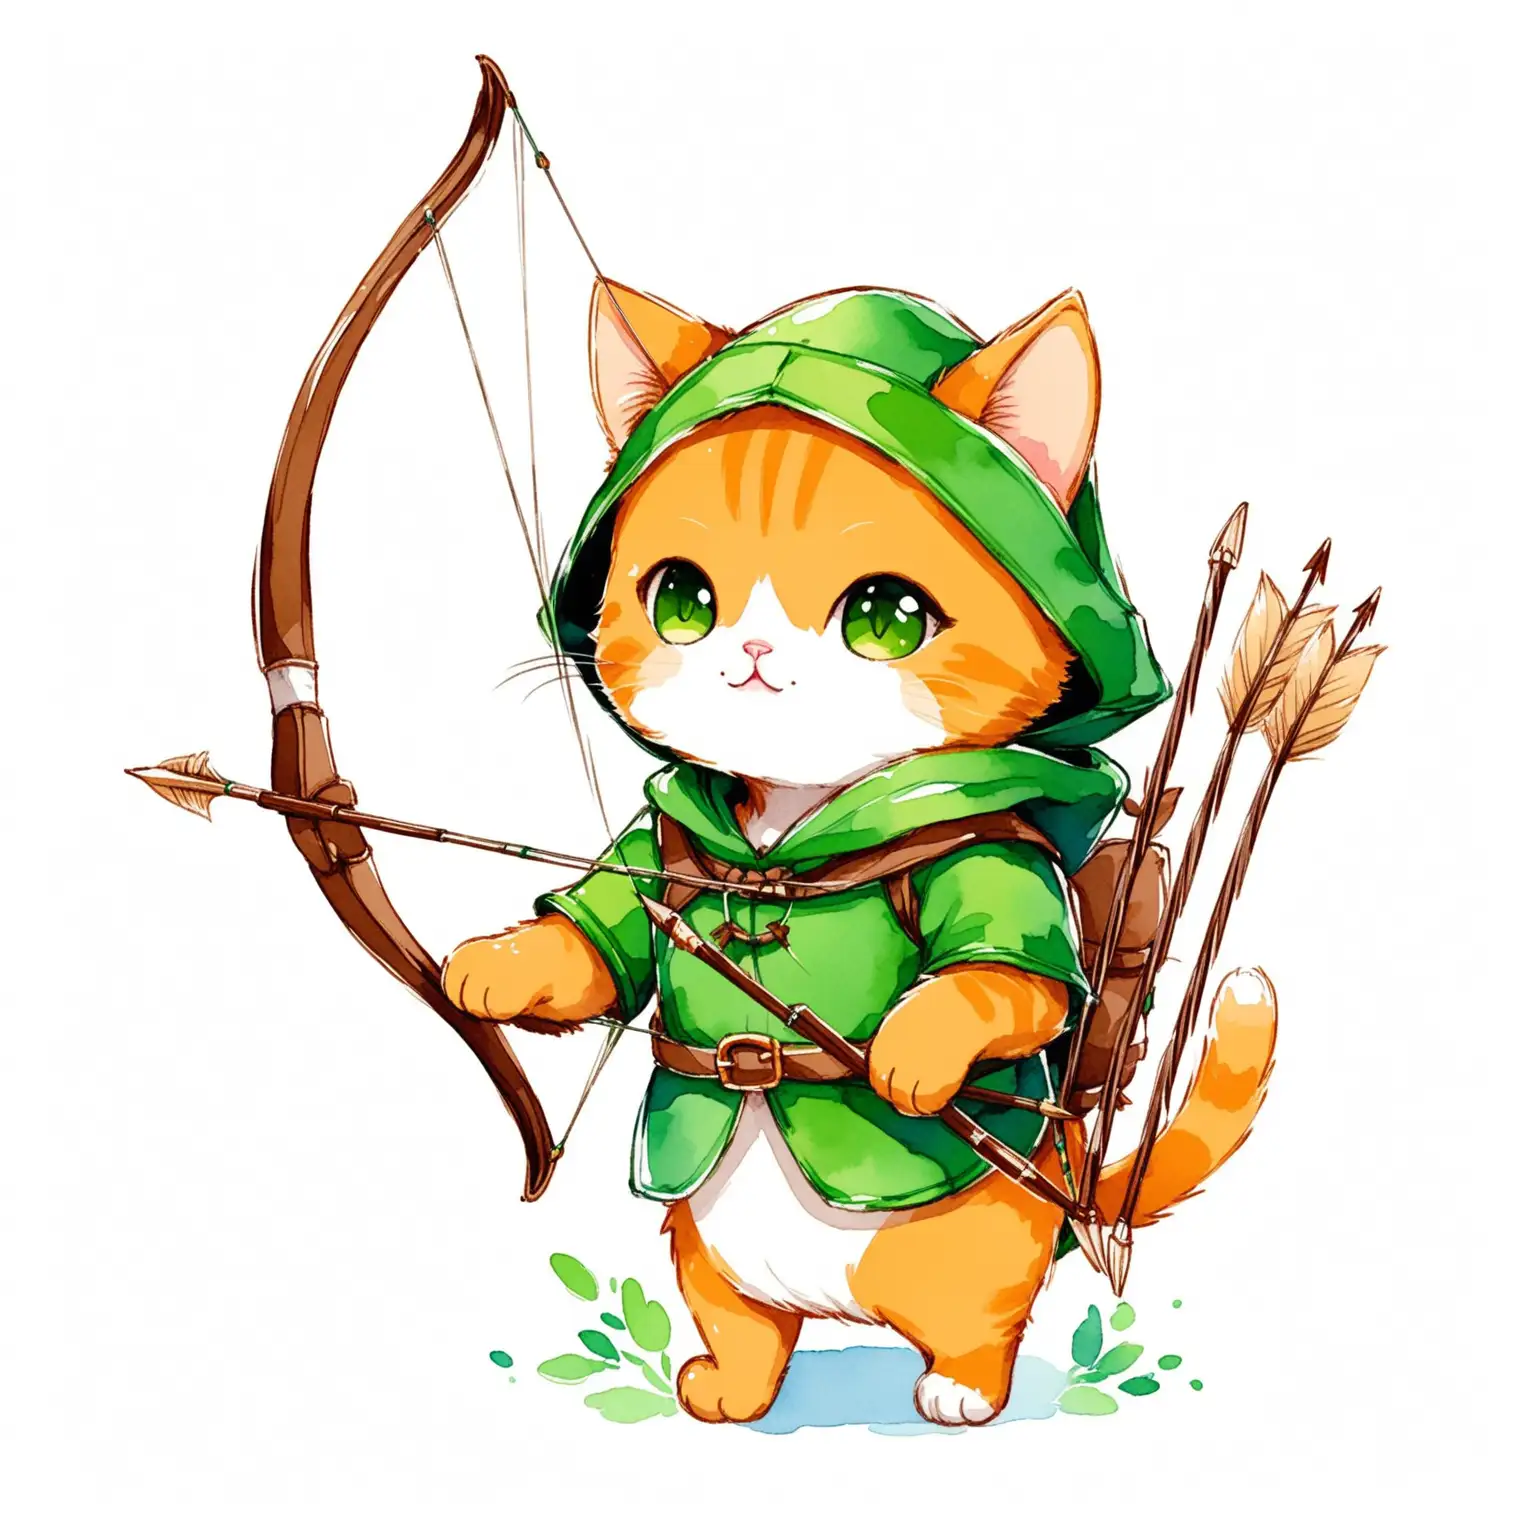 Adorable Cat as Robin Hood with Bow and Arrows Watercolor Minimalist Illustration